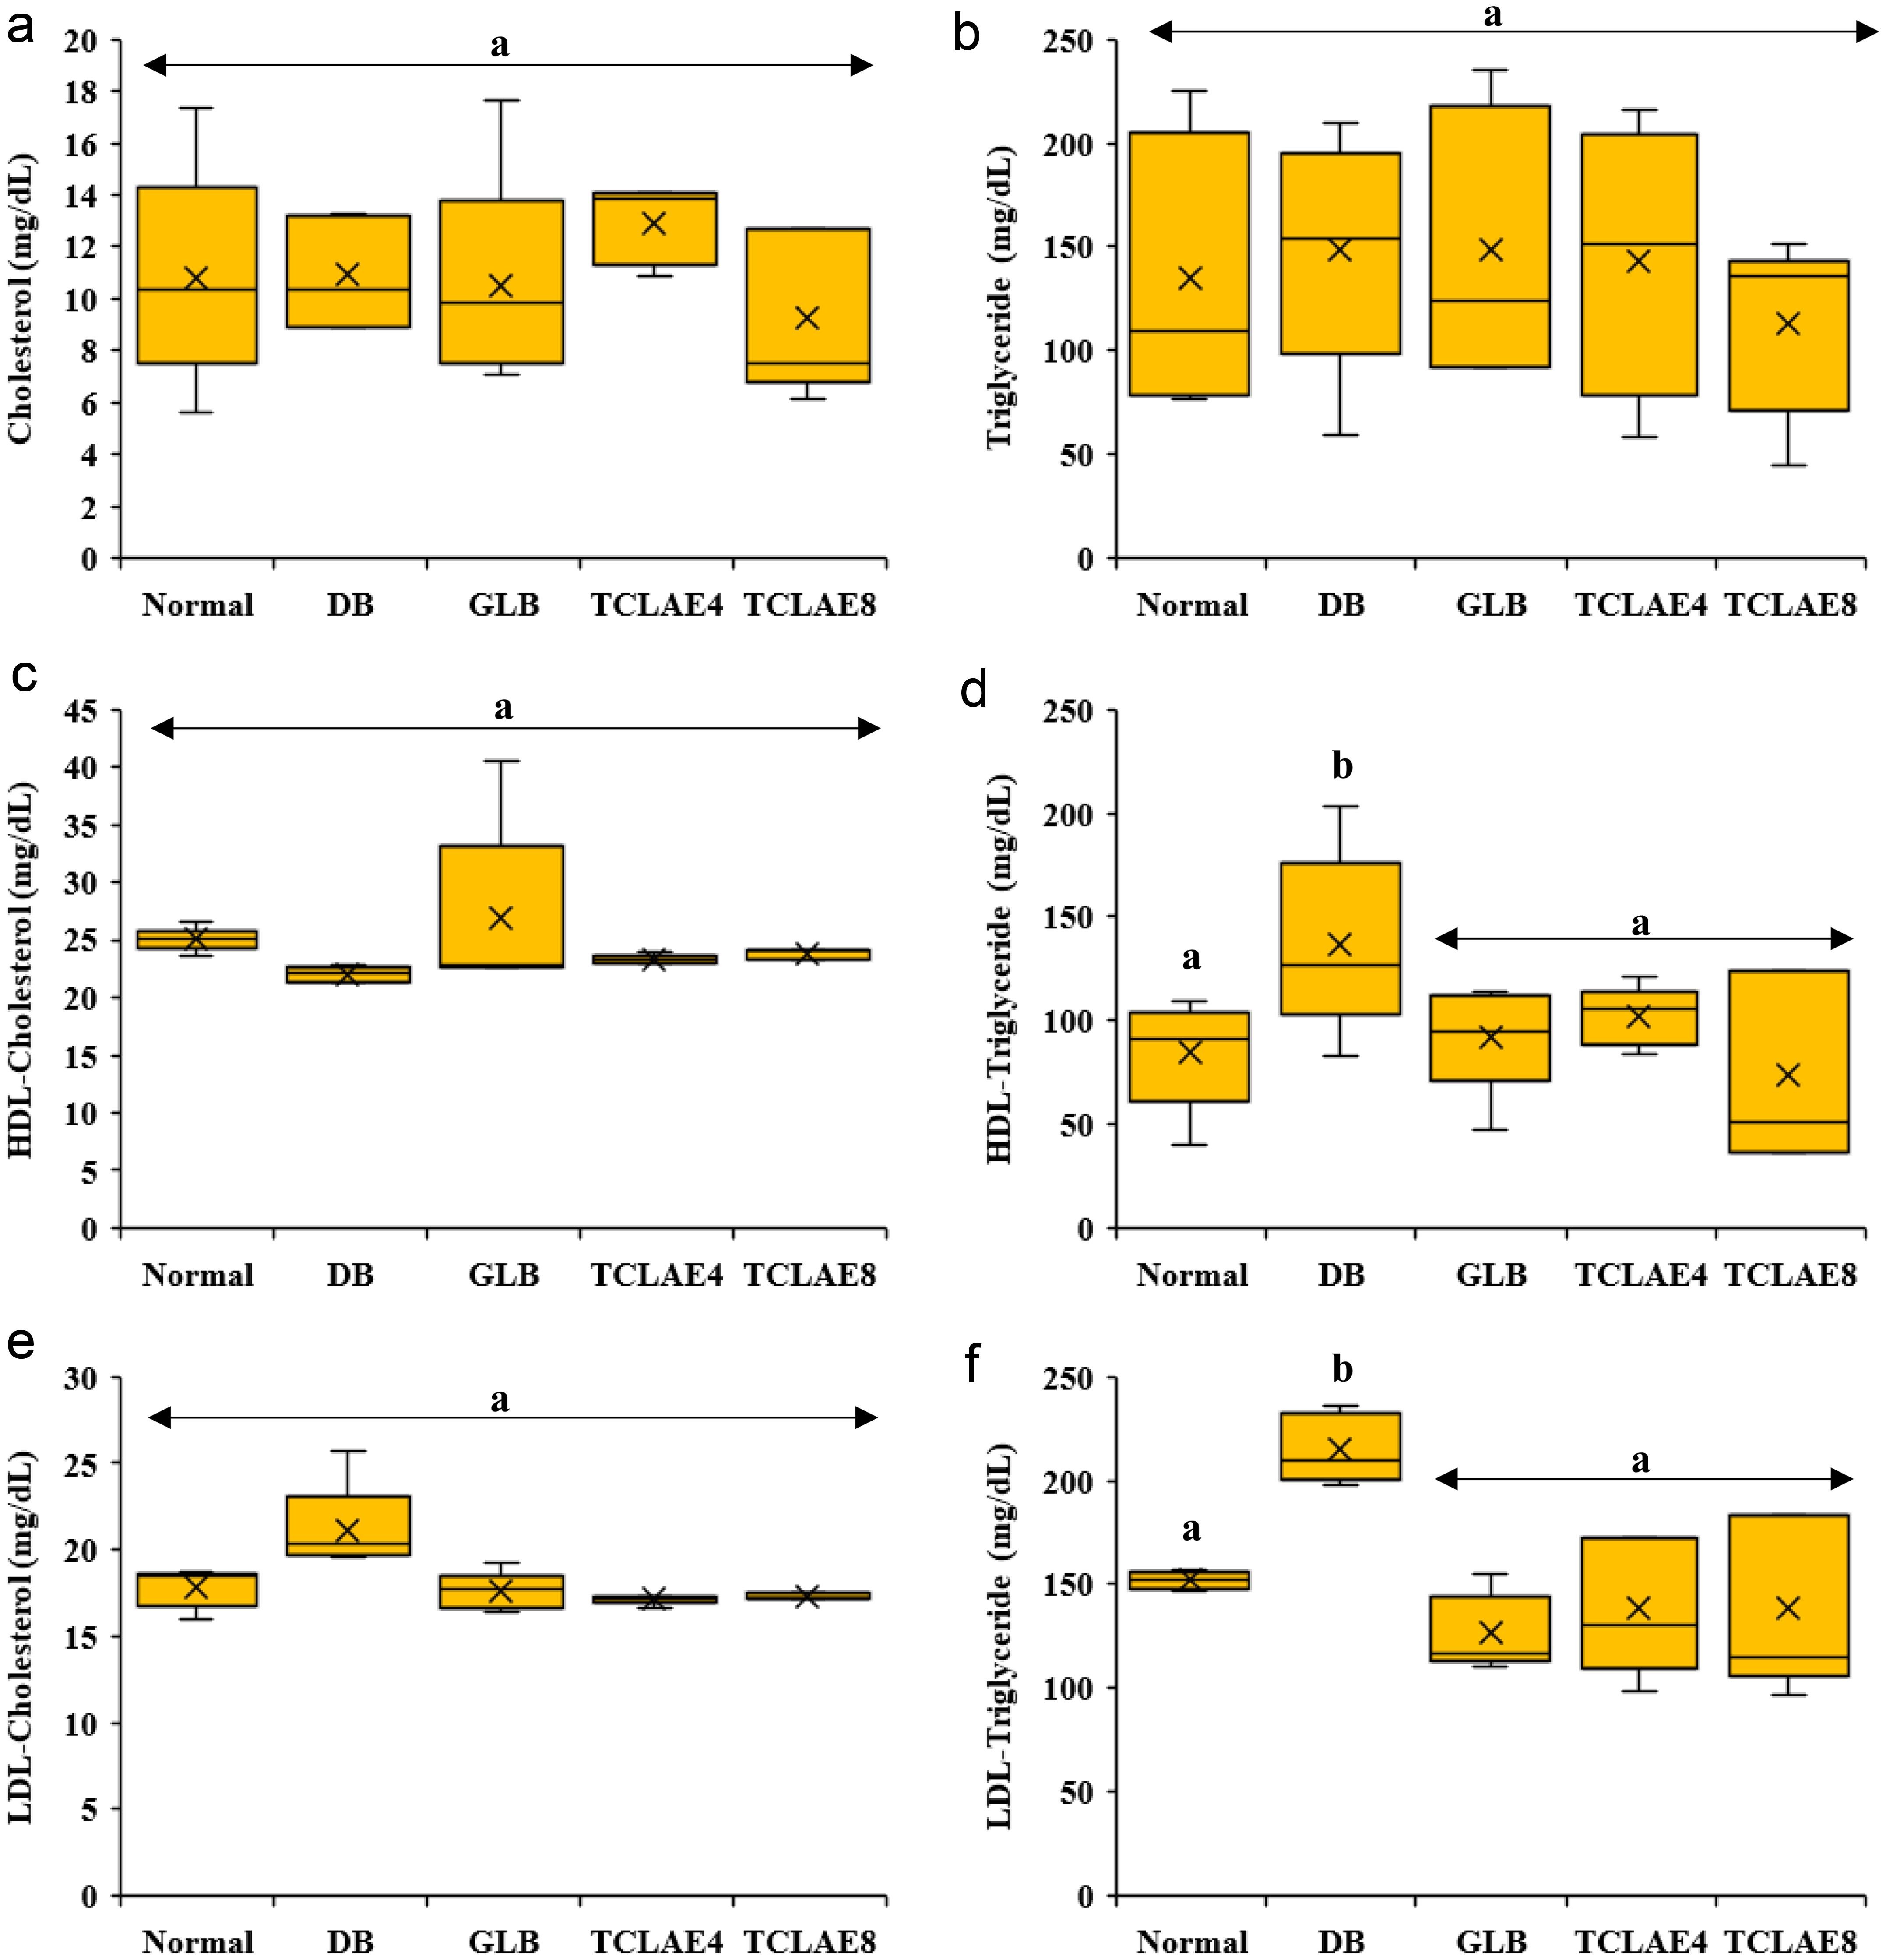 Effect of TCLAE treatment on the renal (a) cholesterol, (b) triglyceride, (c) HDL-cholesterol, (d) HDL-triglyceride, (e) LDL-cholesterol, and (f) LDL-triglyceride concentrations of T2DM rats.